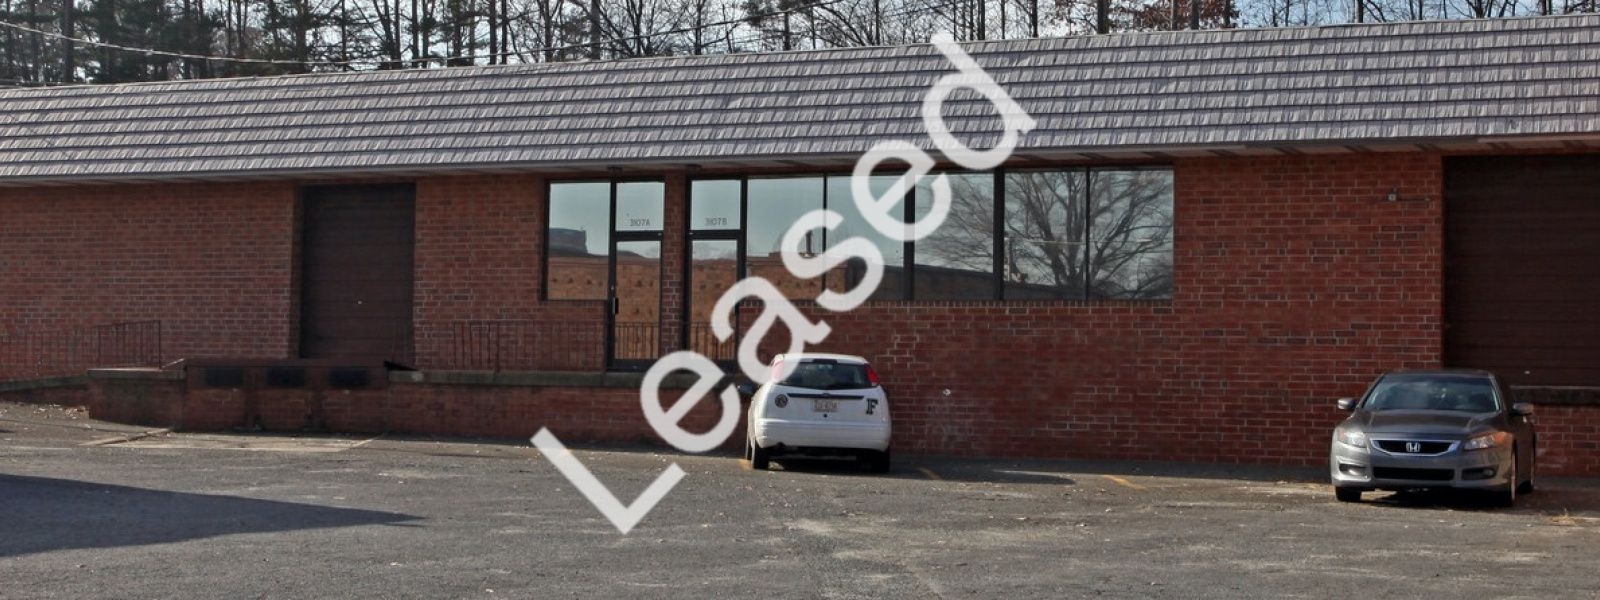 Industrial Space For Lease